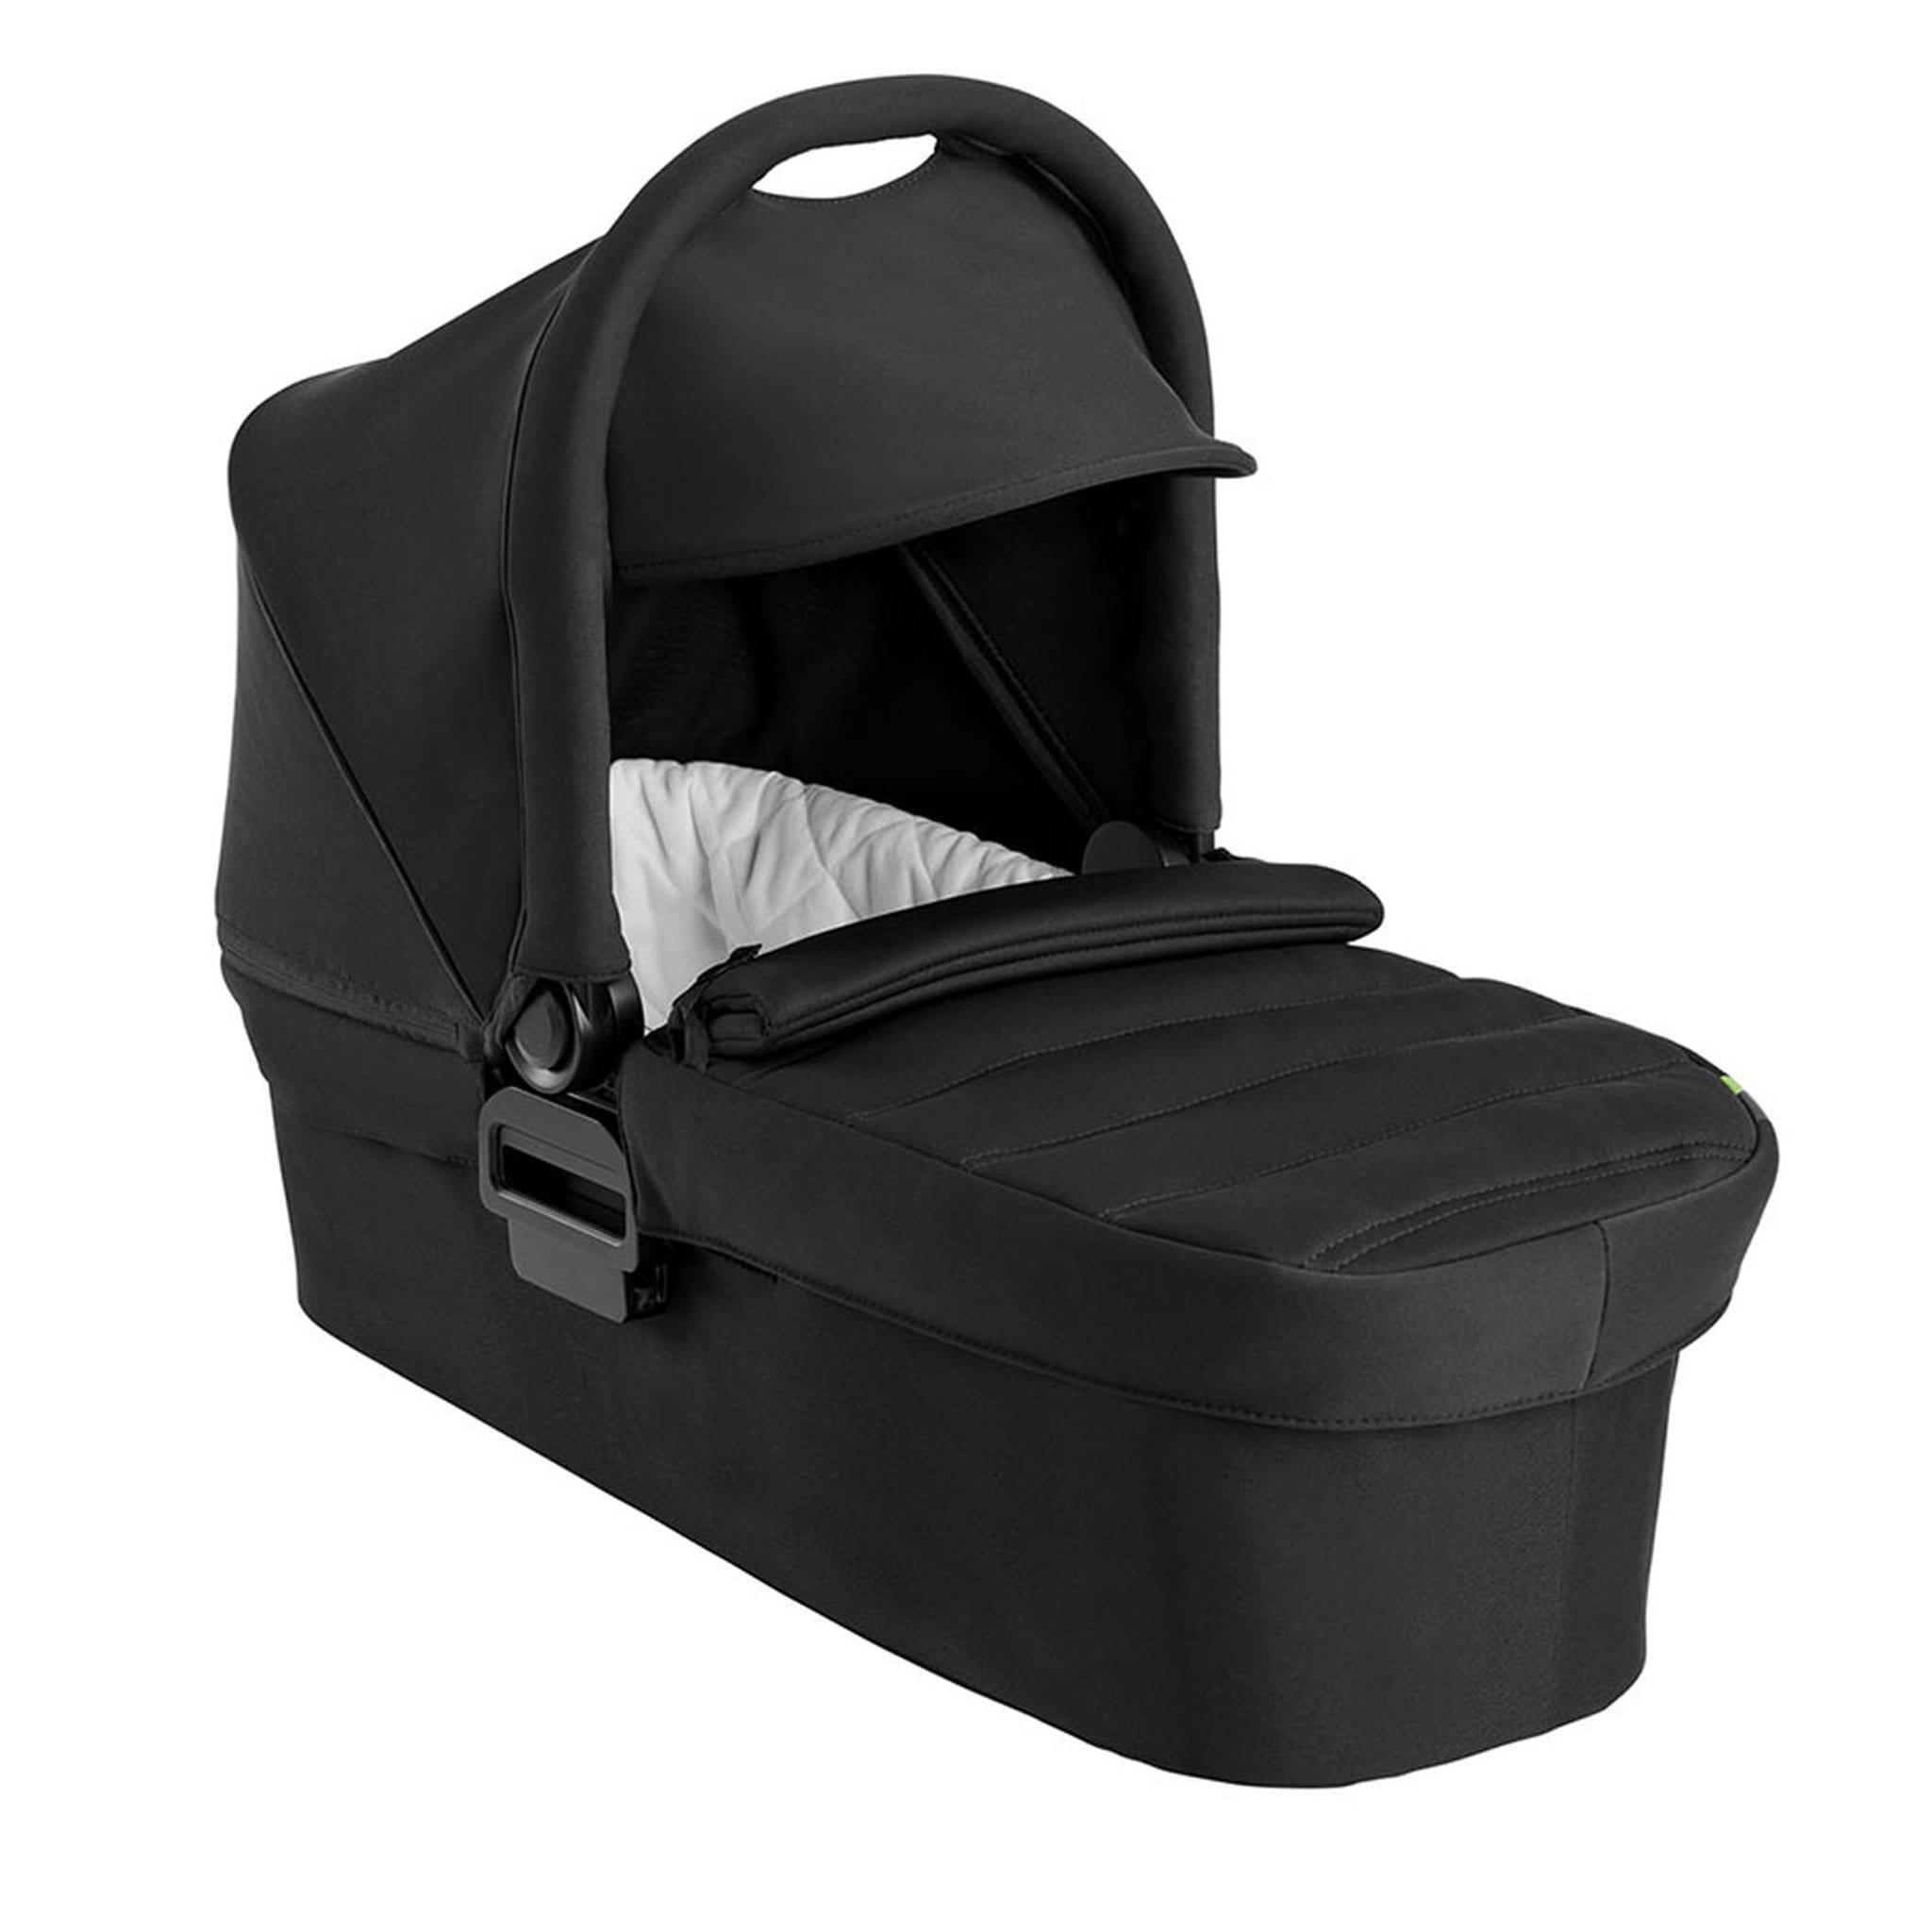 Baby Jogger City Mini 2 Carrycot Opulent Black Chassis & Carrycots 2149201 0047406179237